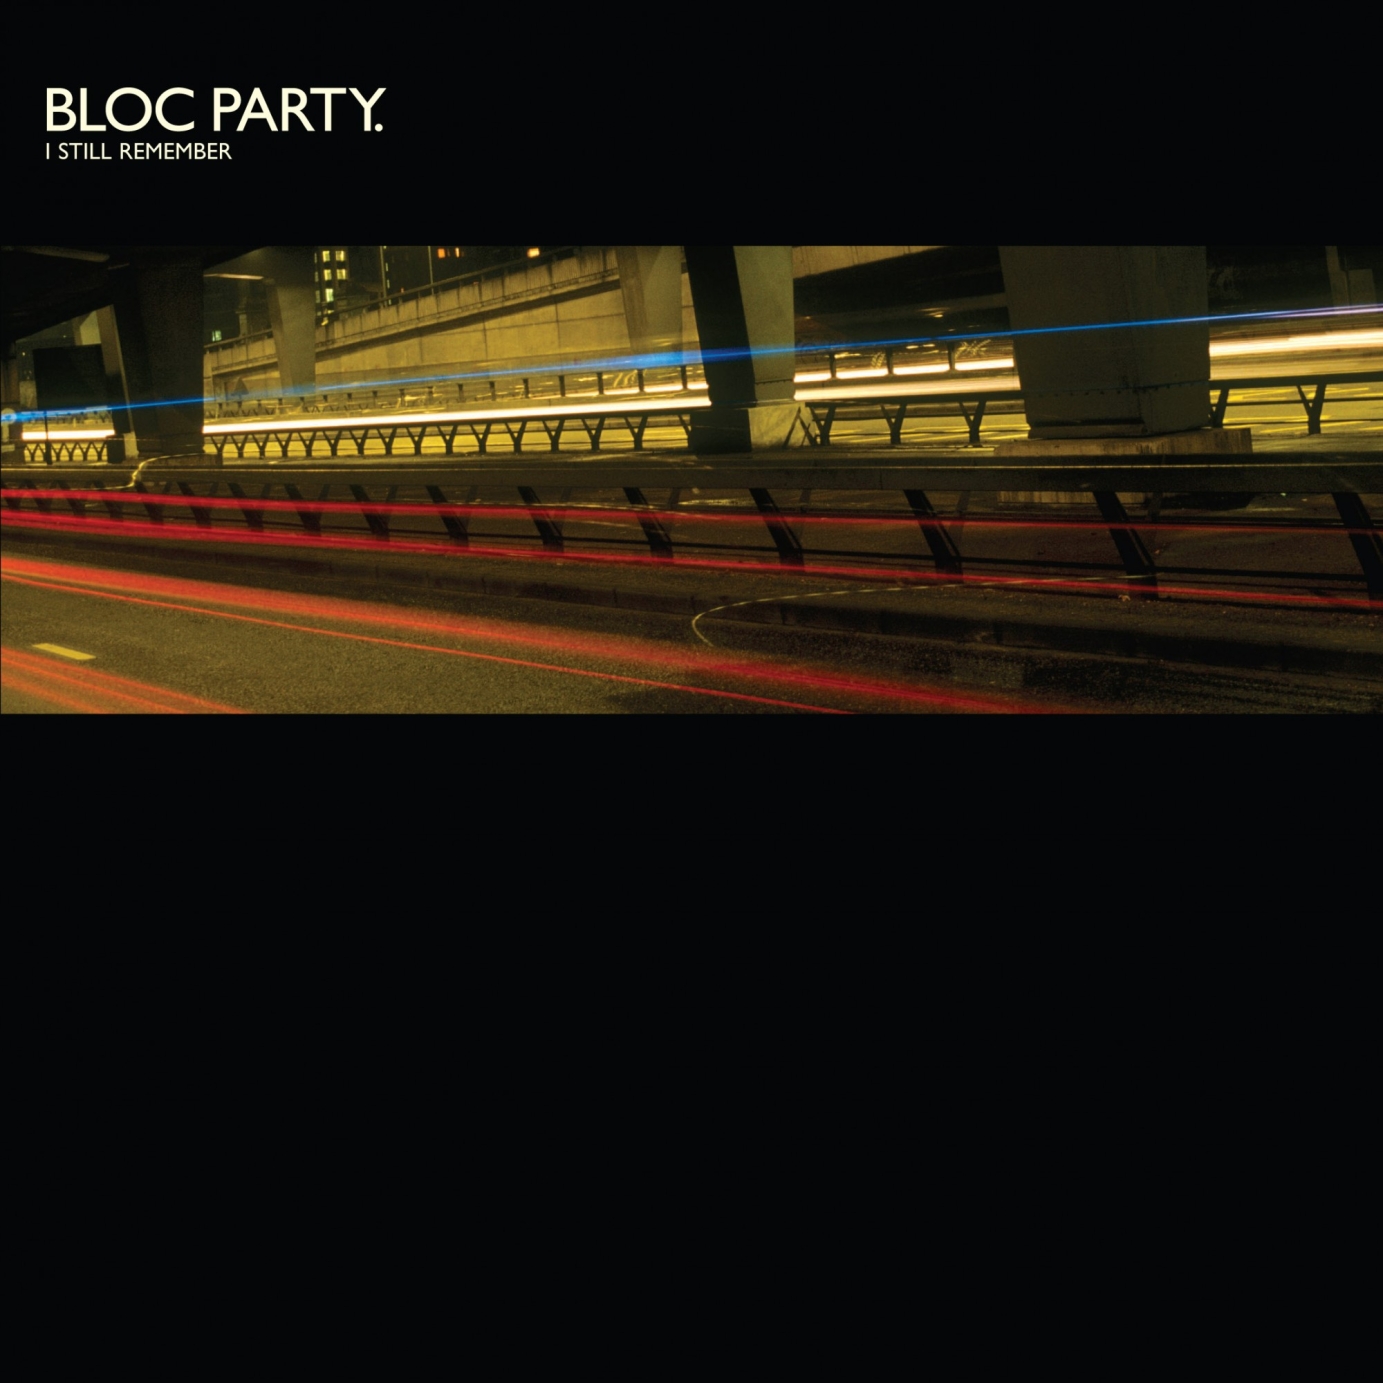 Graphic design for Bloc Party by robcranedesign